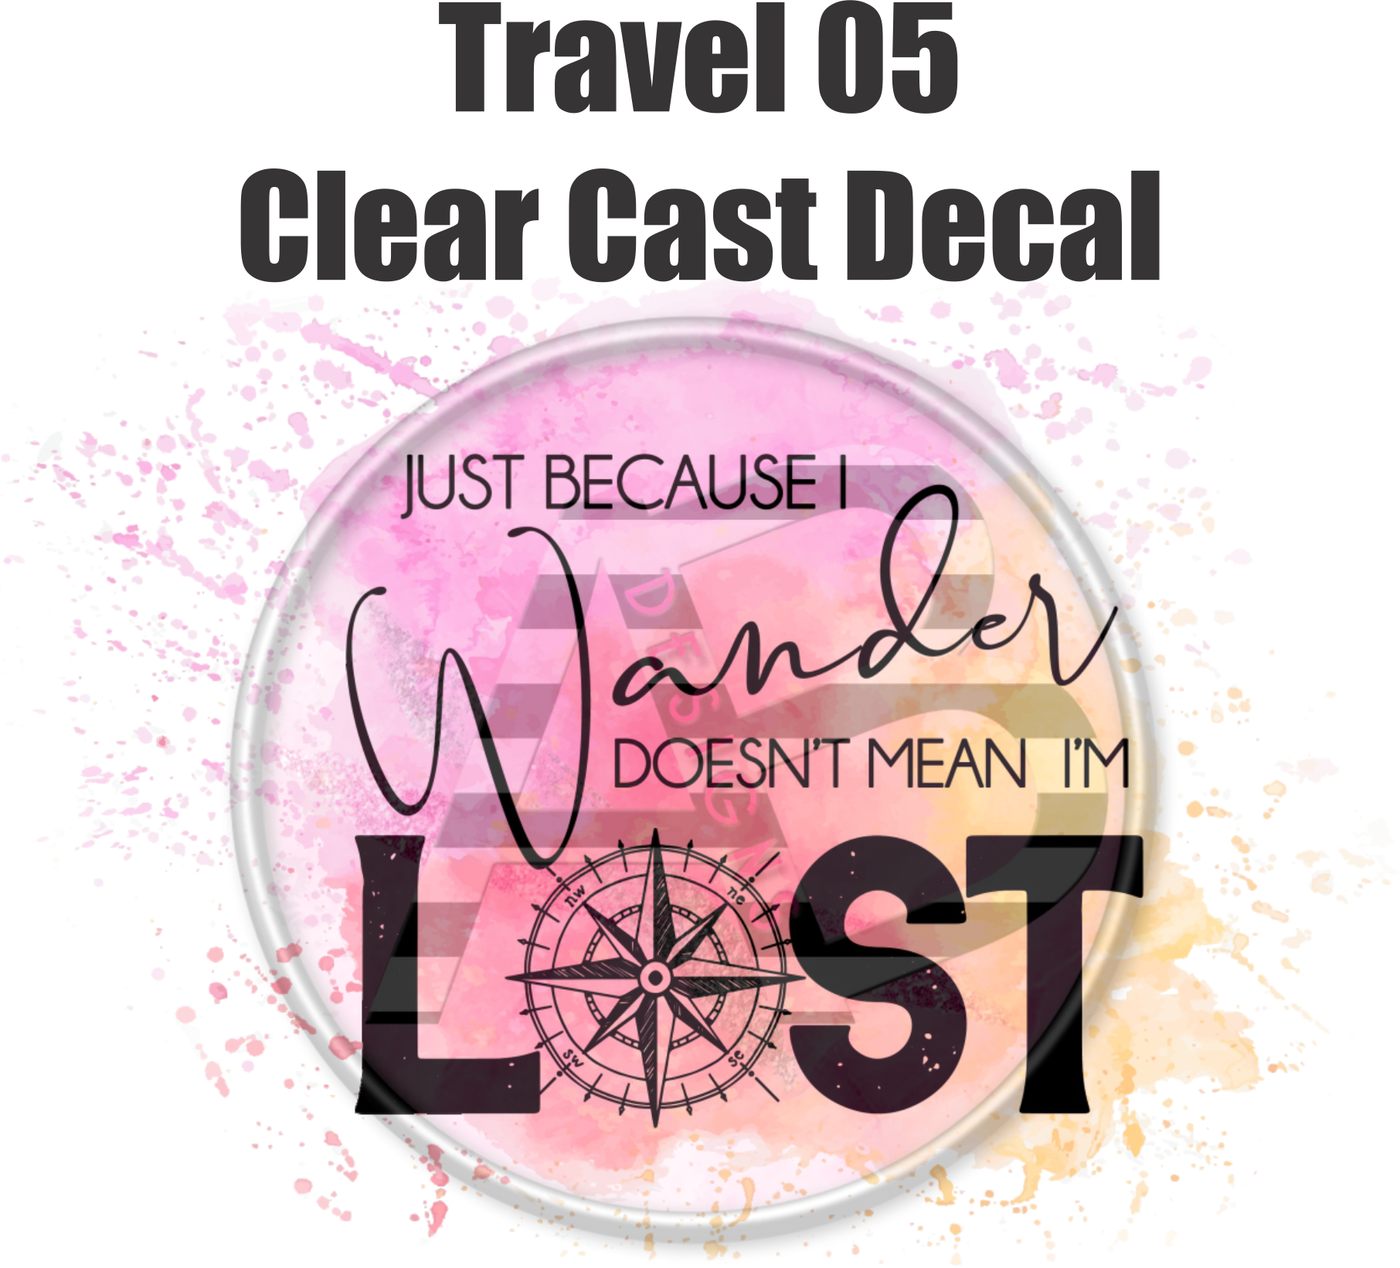 Travel 05 - Clear Cast Decal